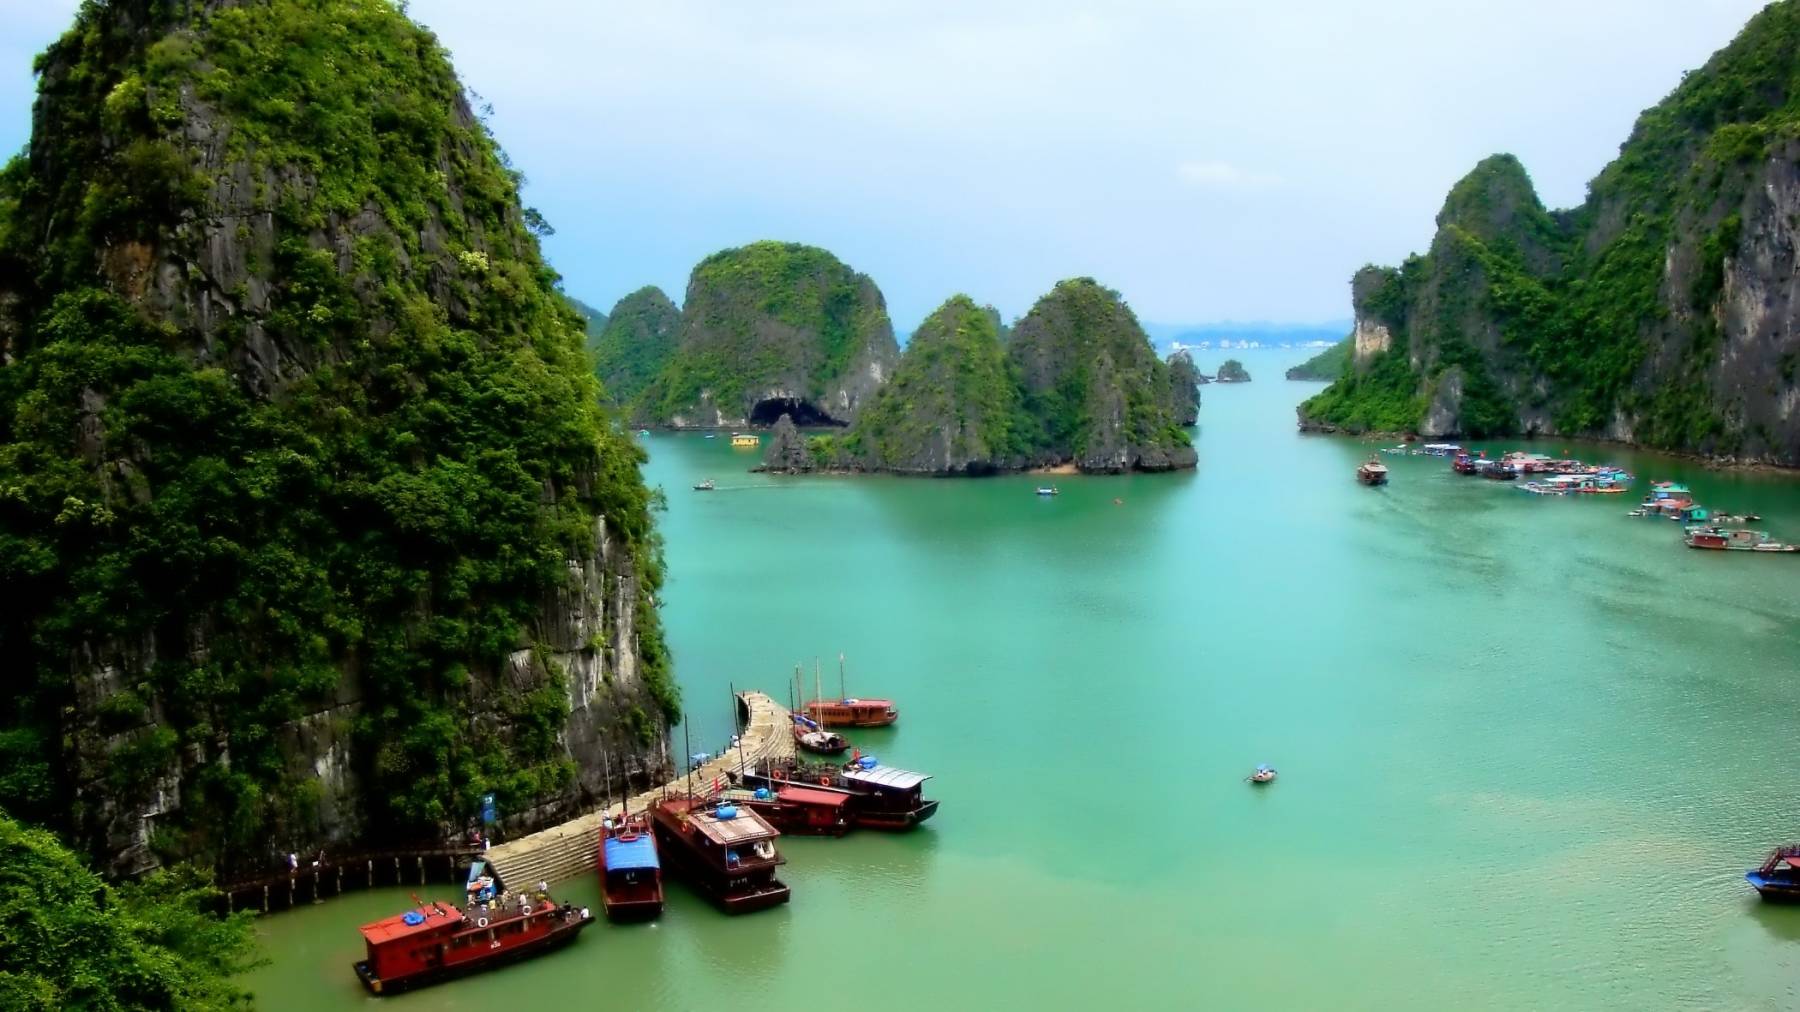 View from the above of the Ha Long Bay by Francesco Paroni Sterbini